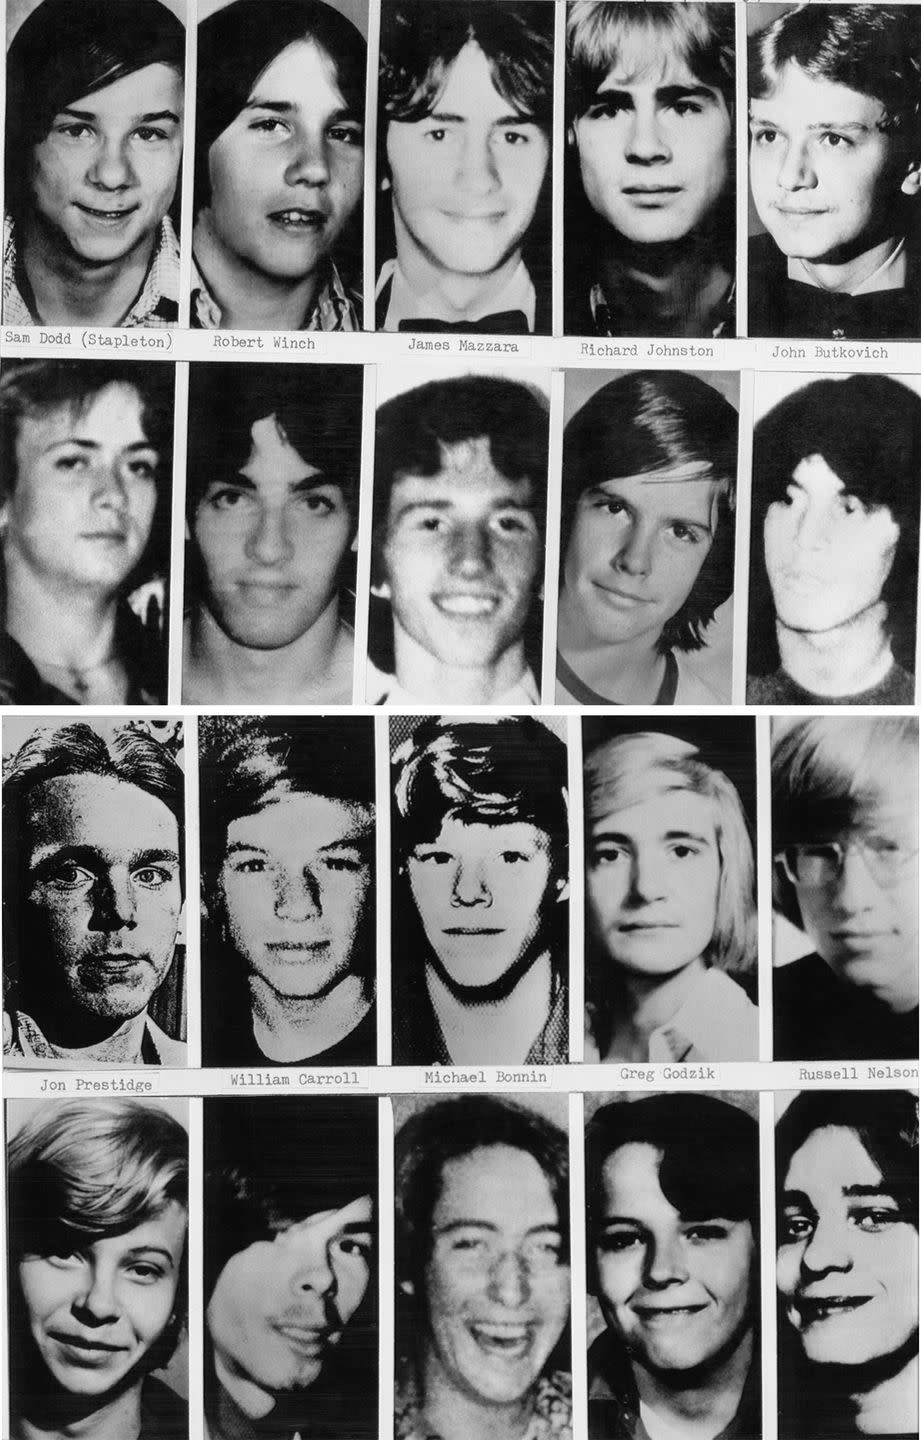 A Serial Killer, a Receipt, and My Mom: Haunted by the Murder of 33 Boys